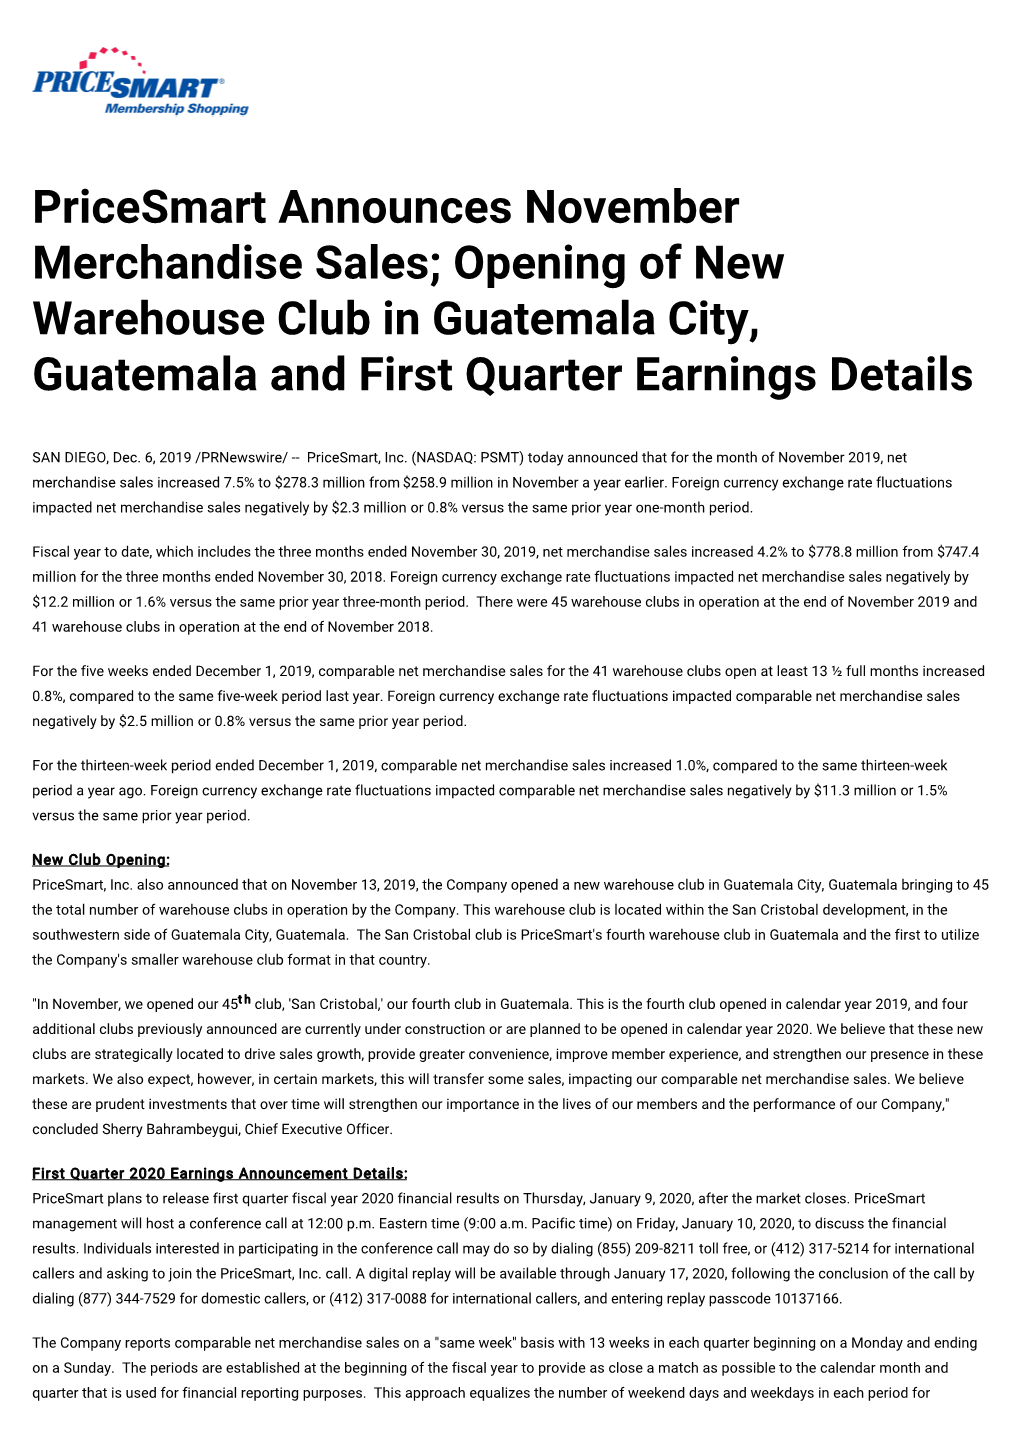 Pricesmart Announces November Merchandise Sales; Opening of New Warehouse Club in Guatemala City, Guatemala and First Quarter Earnings Details